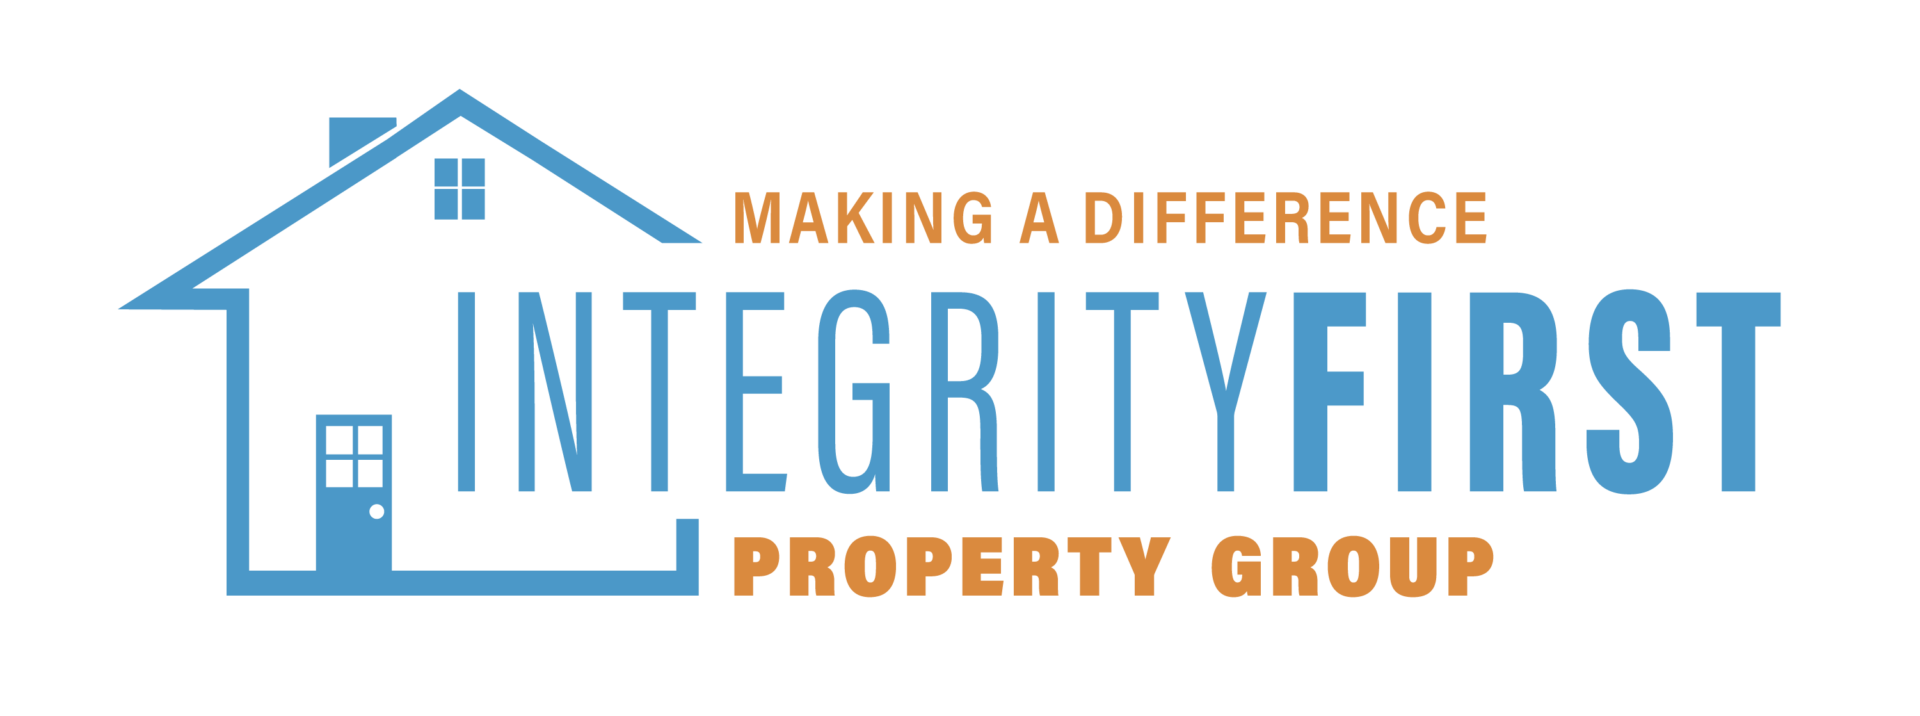 Turnkey Investments by Integrity First Property Group logo